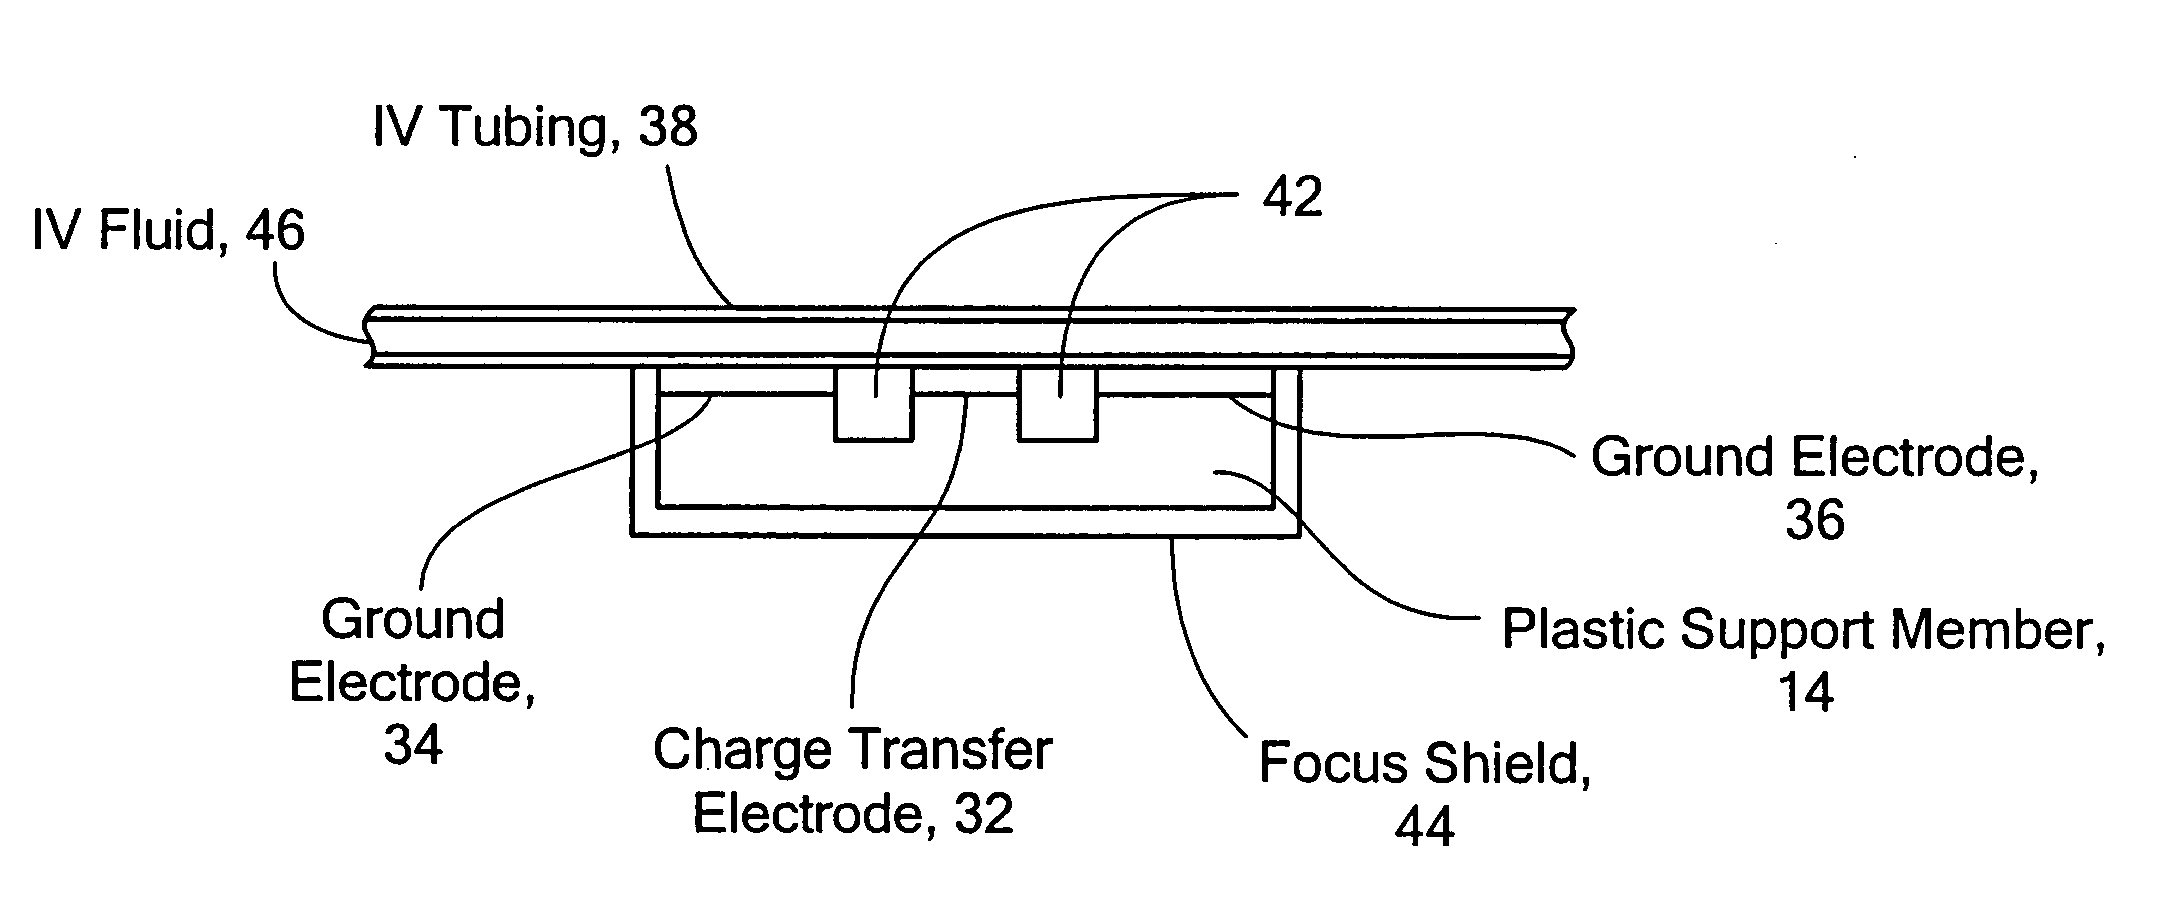 Gas detection in an intravenous fluid delivery system